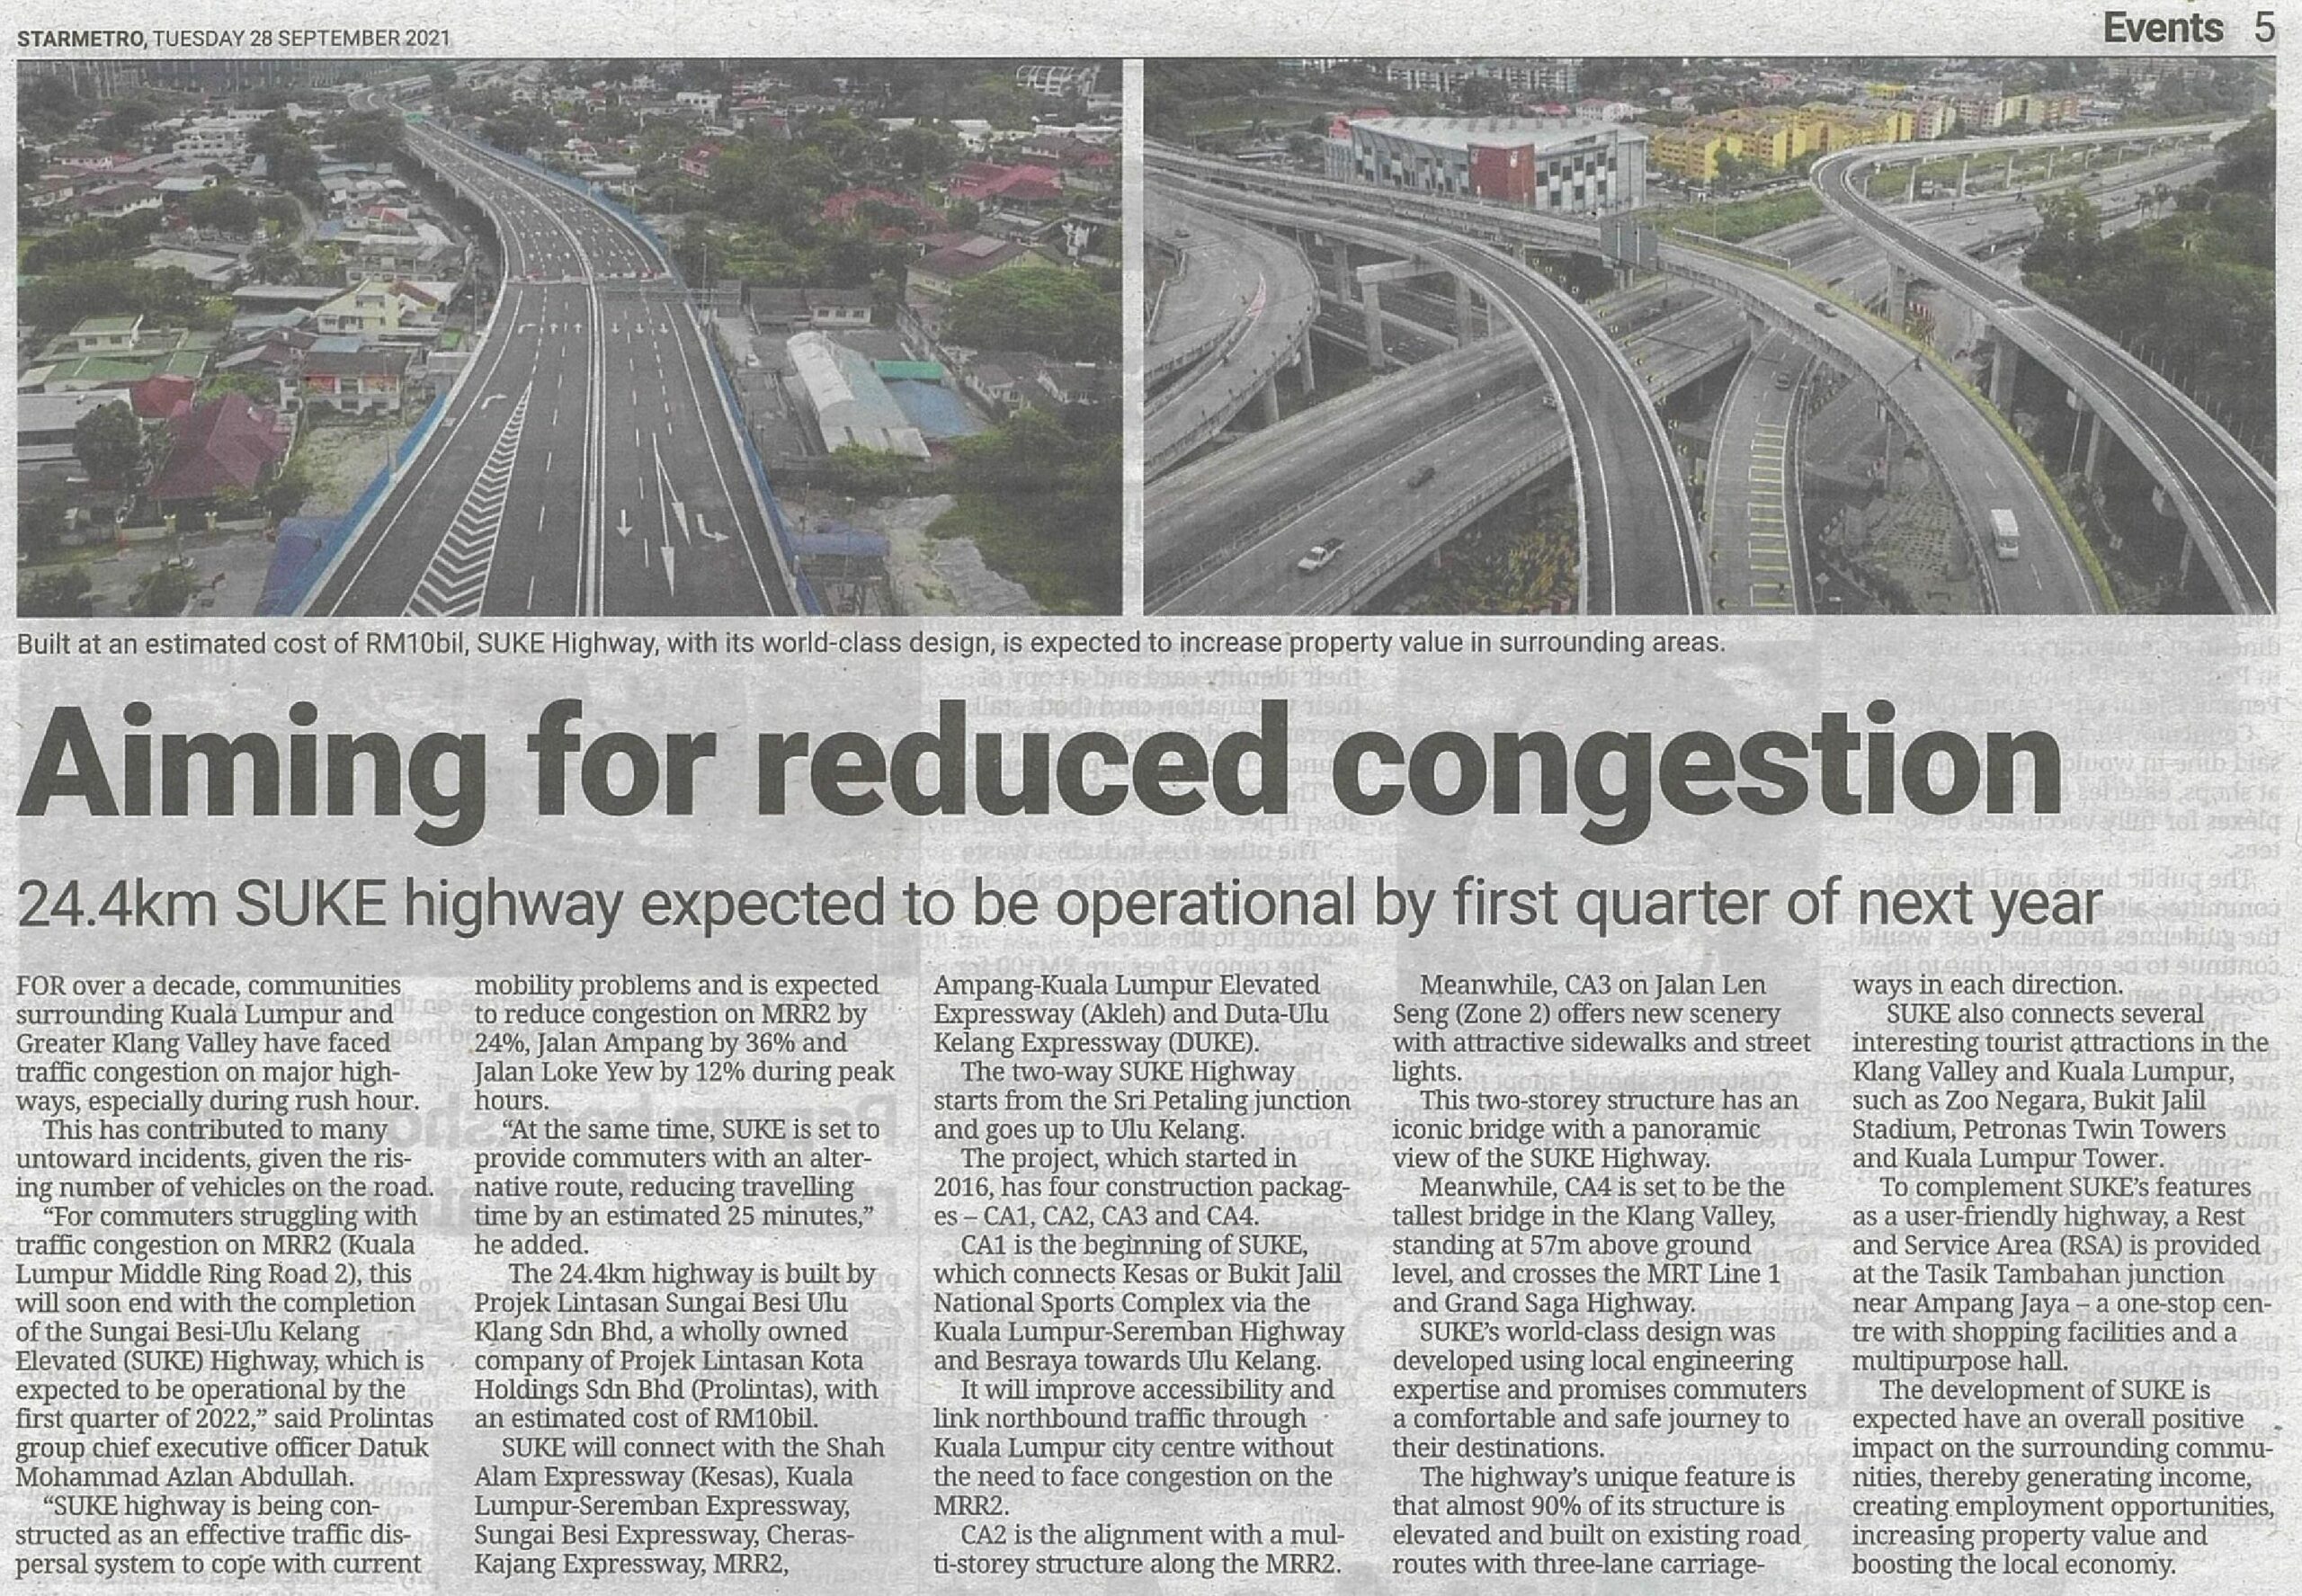 SUKE aiming for reduced congestion